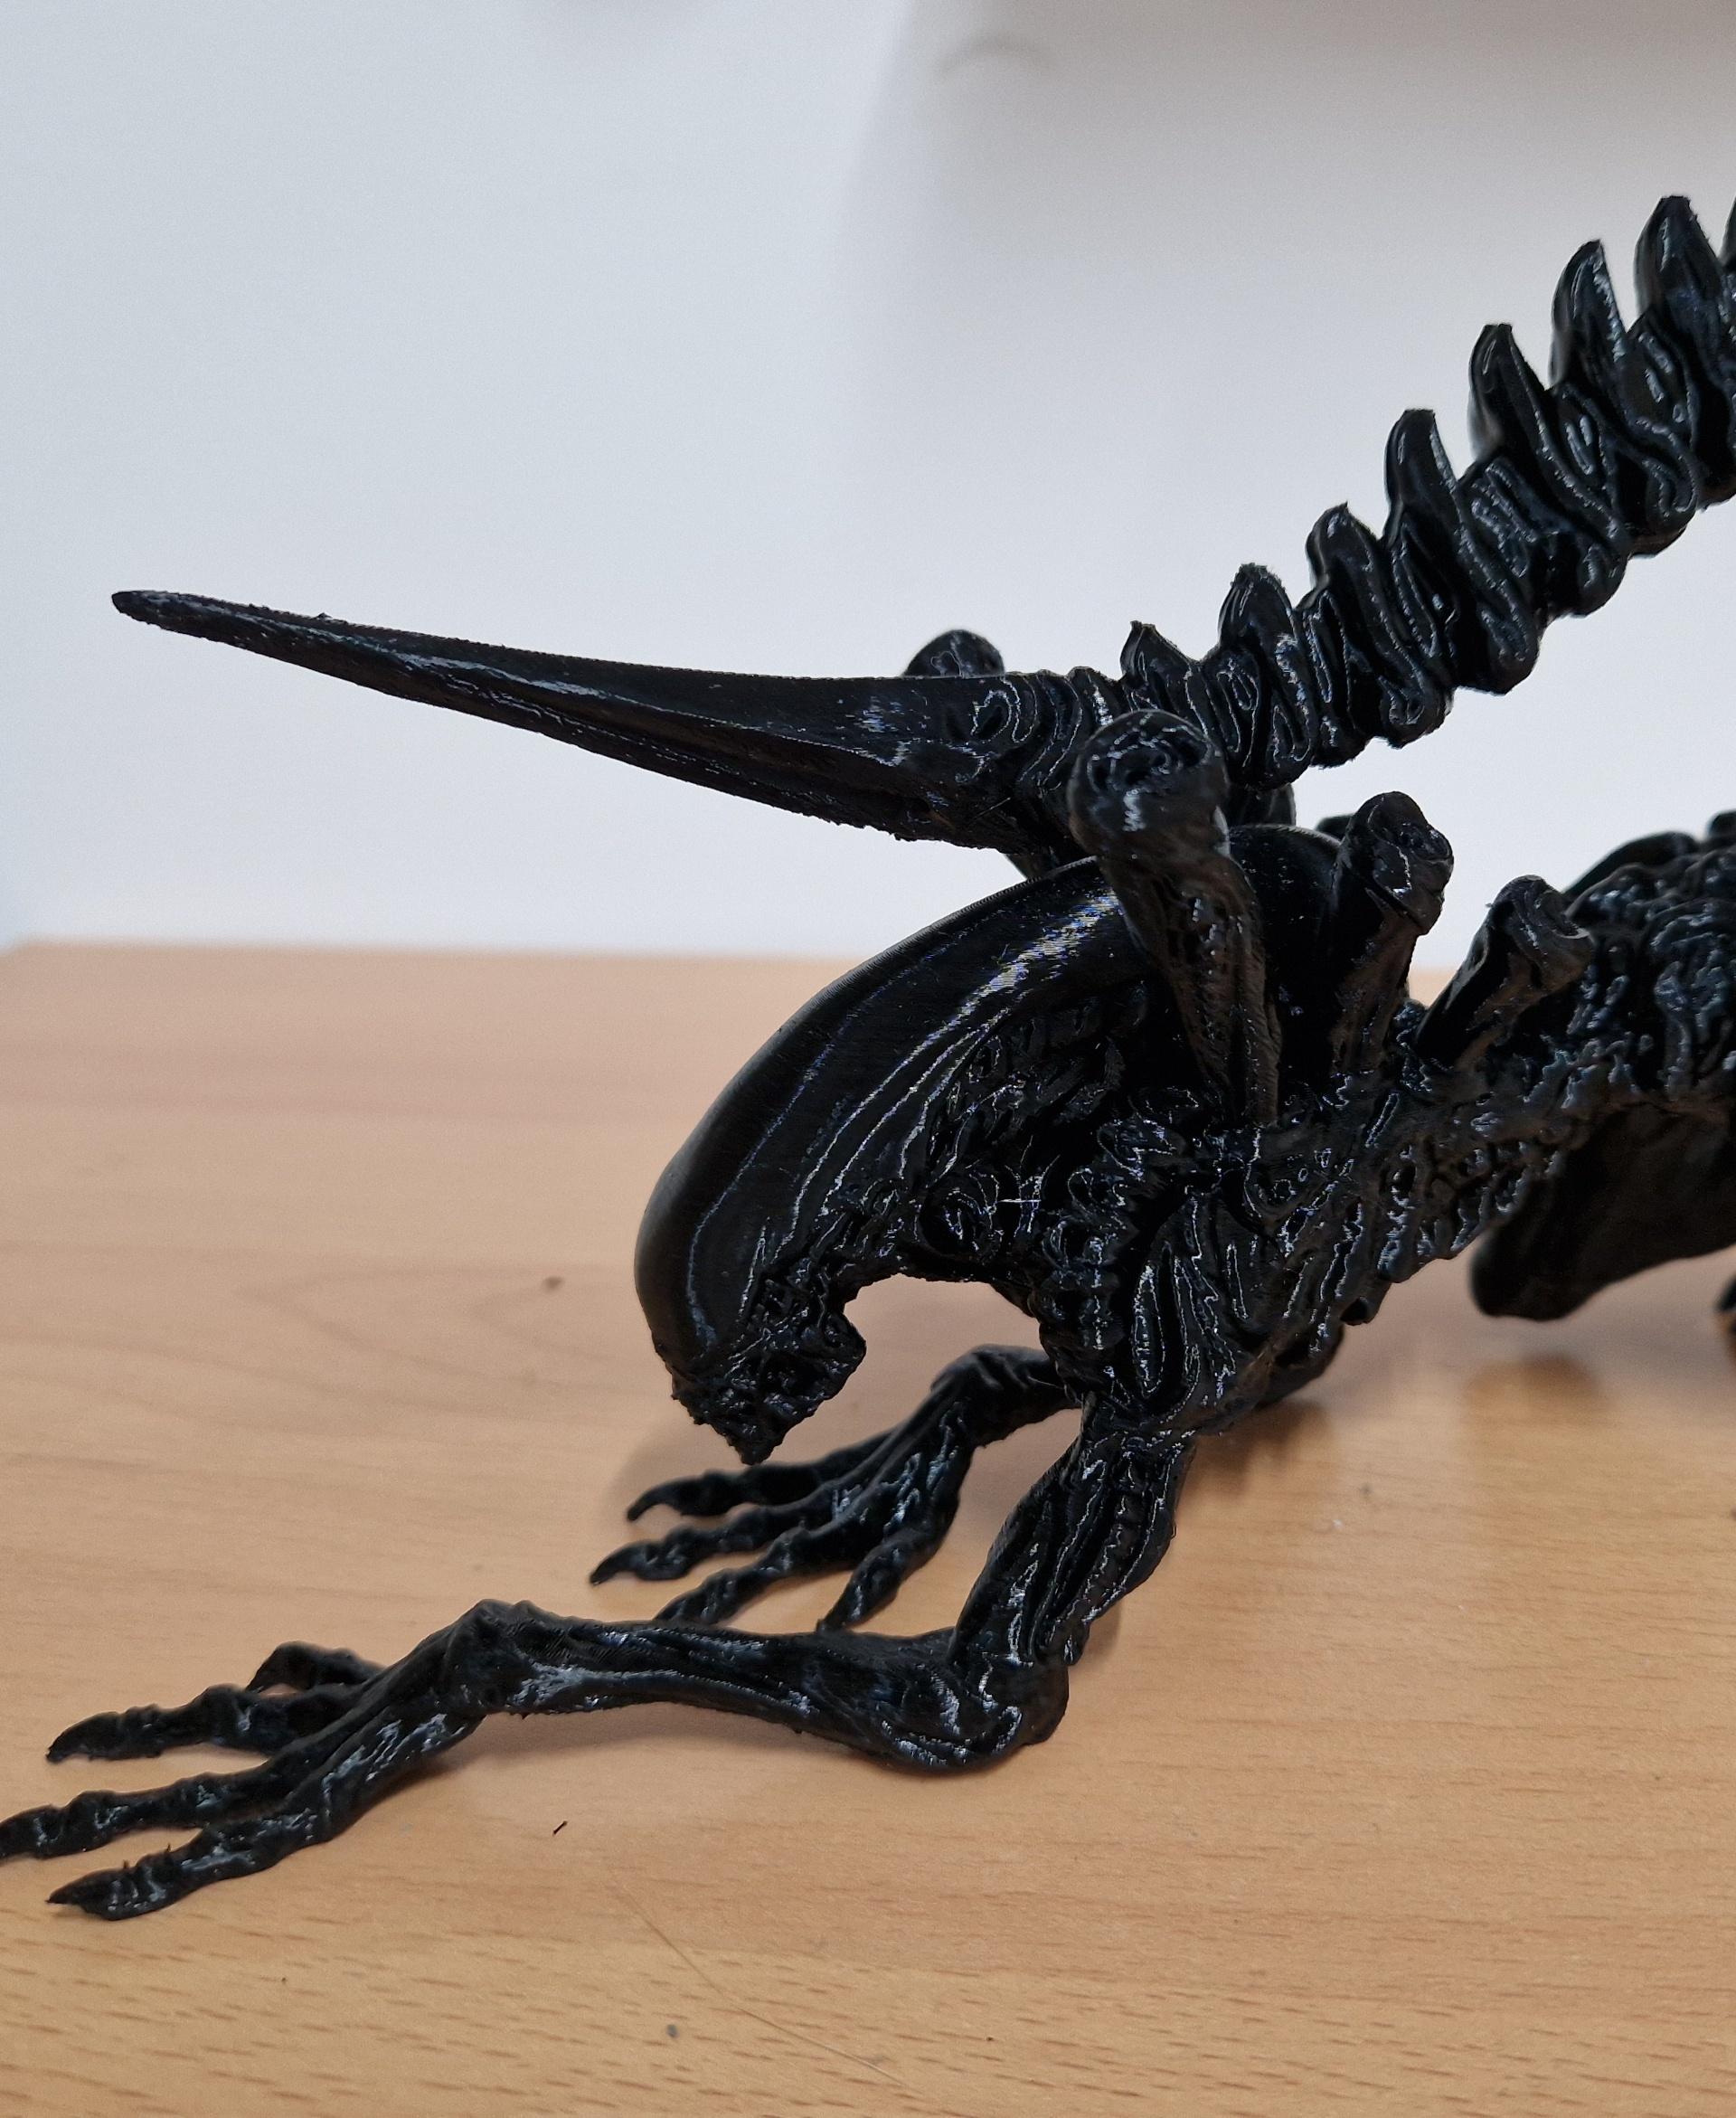 Alien - Xenomorph - Full Figure - 25 CM  - Setup: BL P1S using black eSUN PETG, with a 0.16mm layer, sliced in BambuStudio with added organic supports. Print took 15hrs, and used 129g

After many hours tweaking a Benchy for this filament, I was happy enough to print this amazing model!

The supports were a pain to remove, but that was caused by the layer adhesion properties of PETG. I wanted to use this material to give strength and a shiny finish.

The model is great, even if the STL file shows alot of surface tessellation. It didn't show on the final print.

If anyone is interested in the filament and process configs, let me know. - 3d model